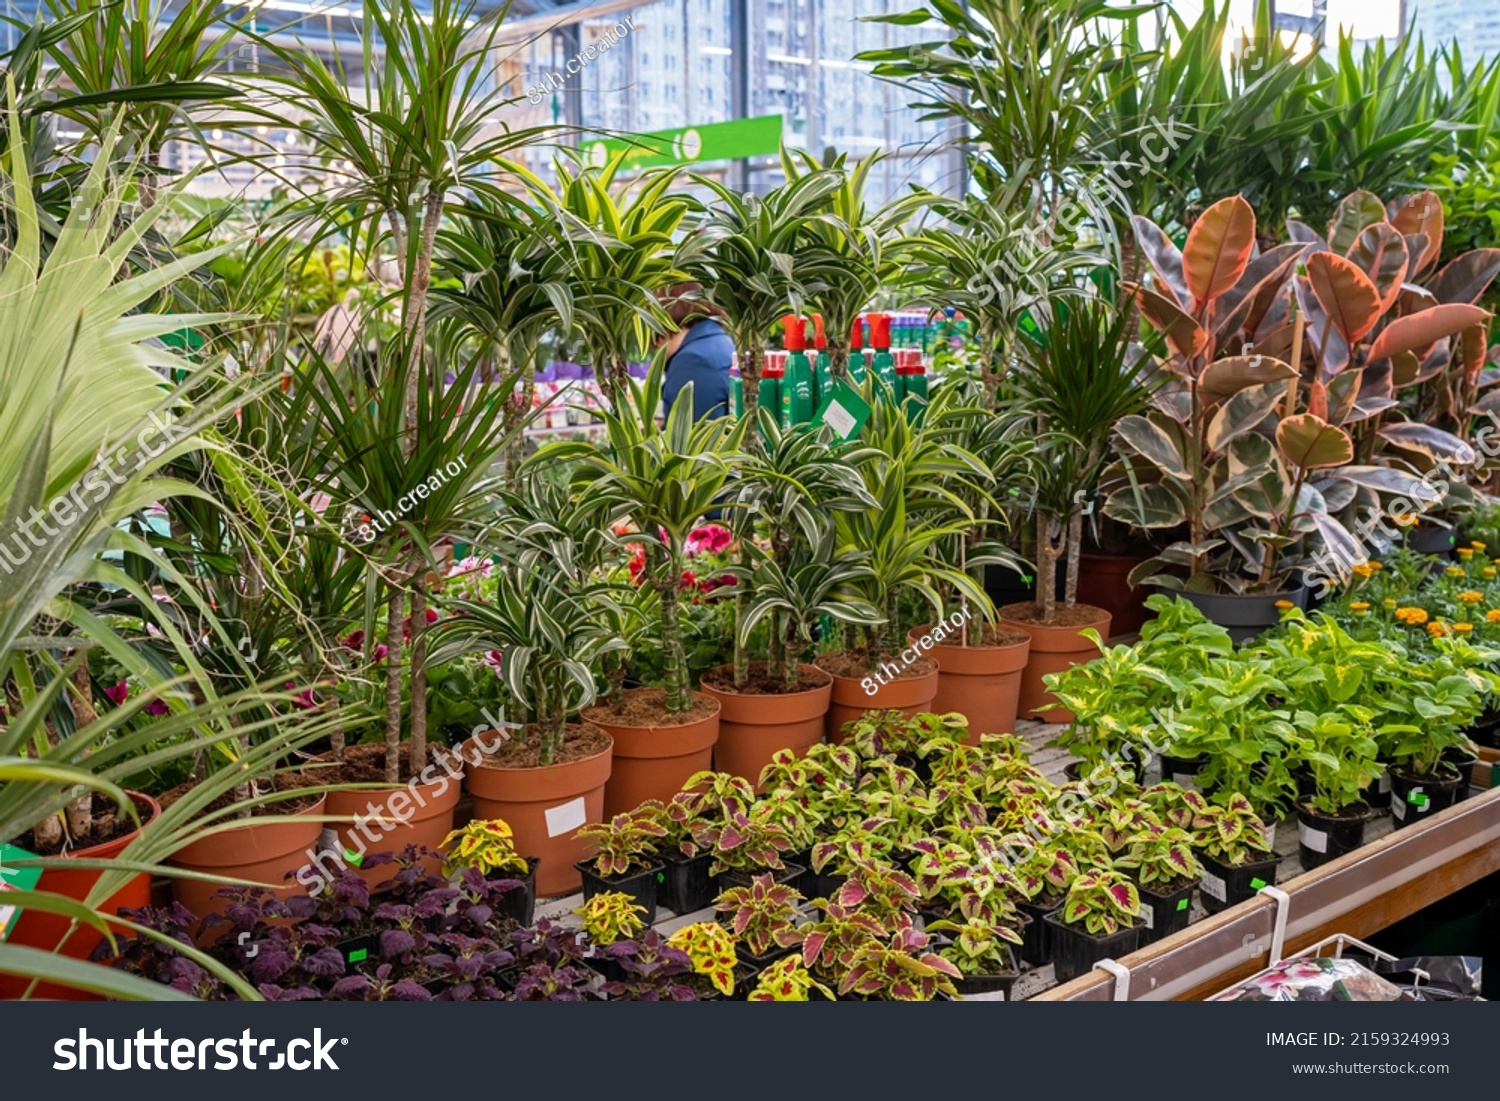 Ornamental plant store. Row of many various colorful plant on shelves display for sale in garden center. #2159324993